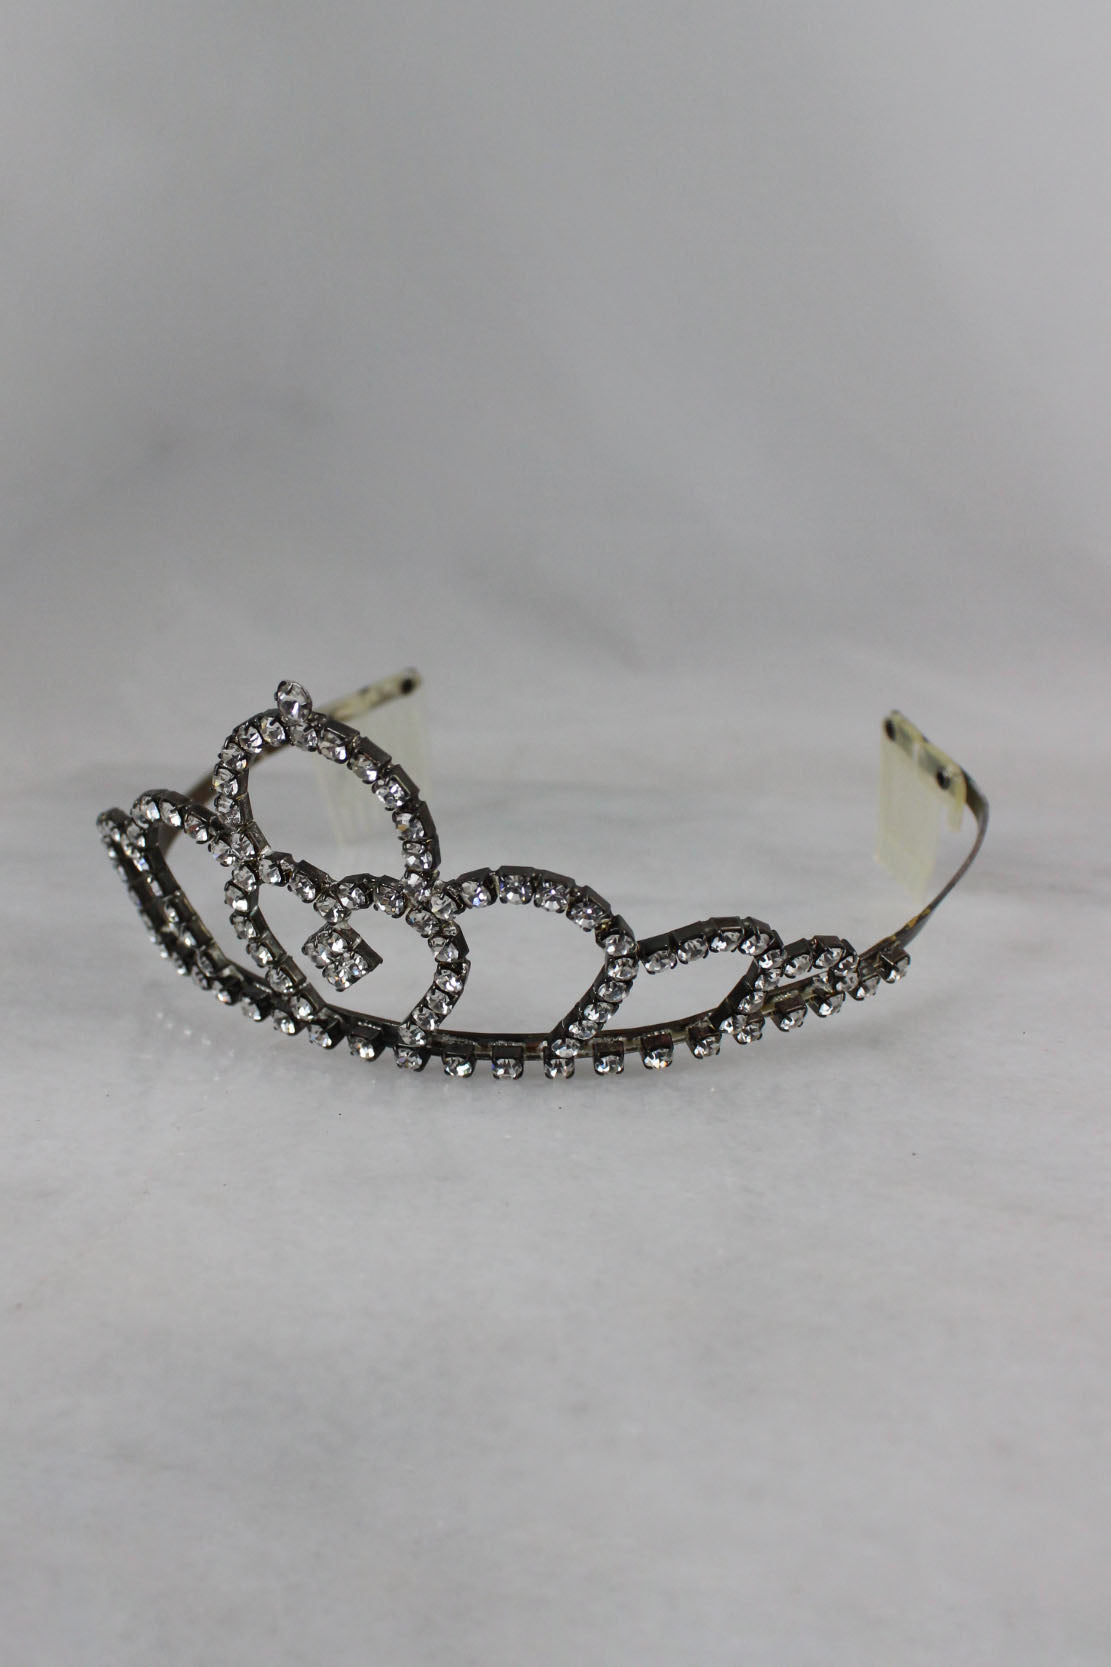 detail view of unlabeled tiara with round cut gems, metal frame and plastic hair combed teeth.